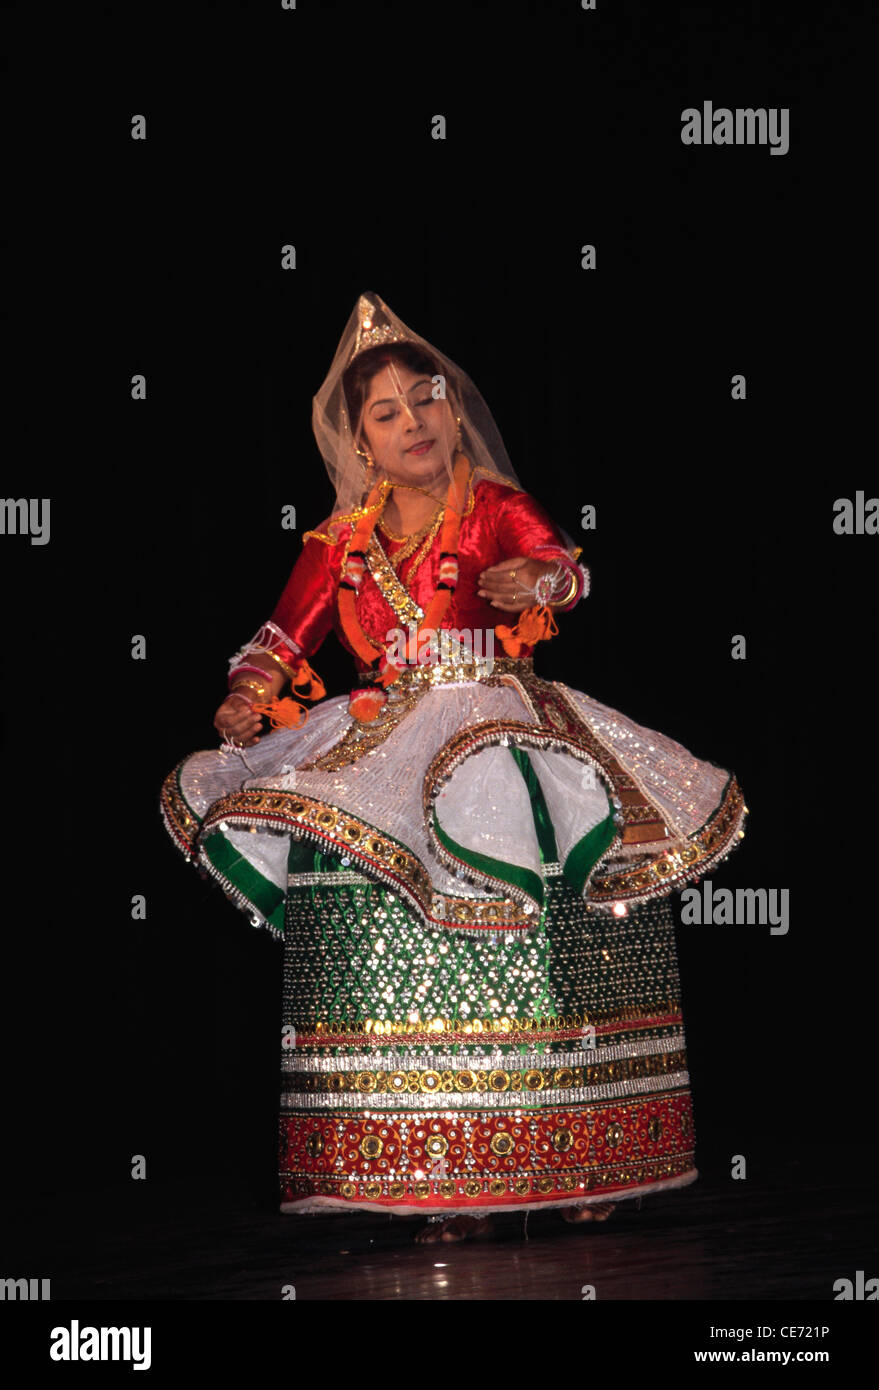 DBA 84225 : Manipuri ; woman performing classical dance of India   Model Released Stock Photo